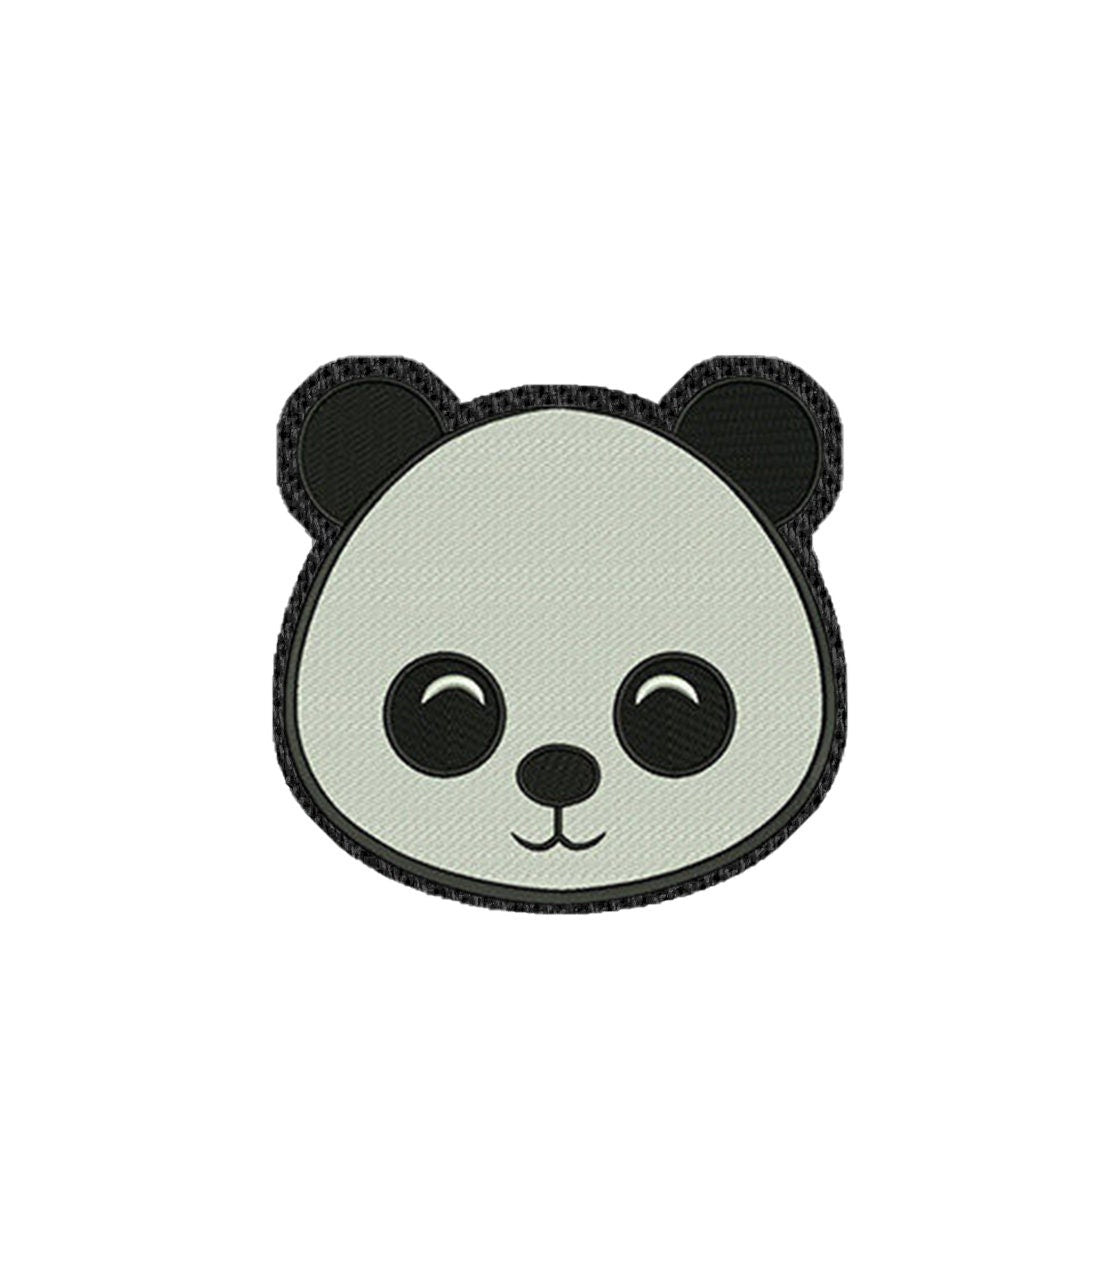 Panda Bear Face Iron on Patch /Sew on embroidered patch Exotic Animal Baby Animals Embroidery Women Applique Merit Badge for Clothing Jacket